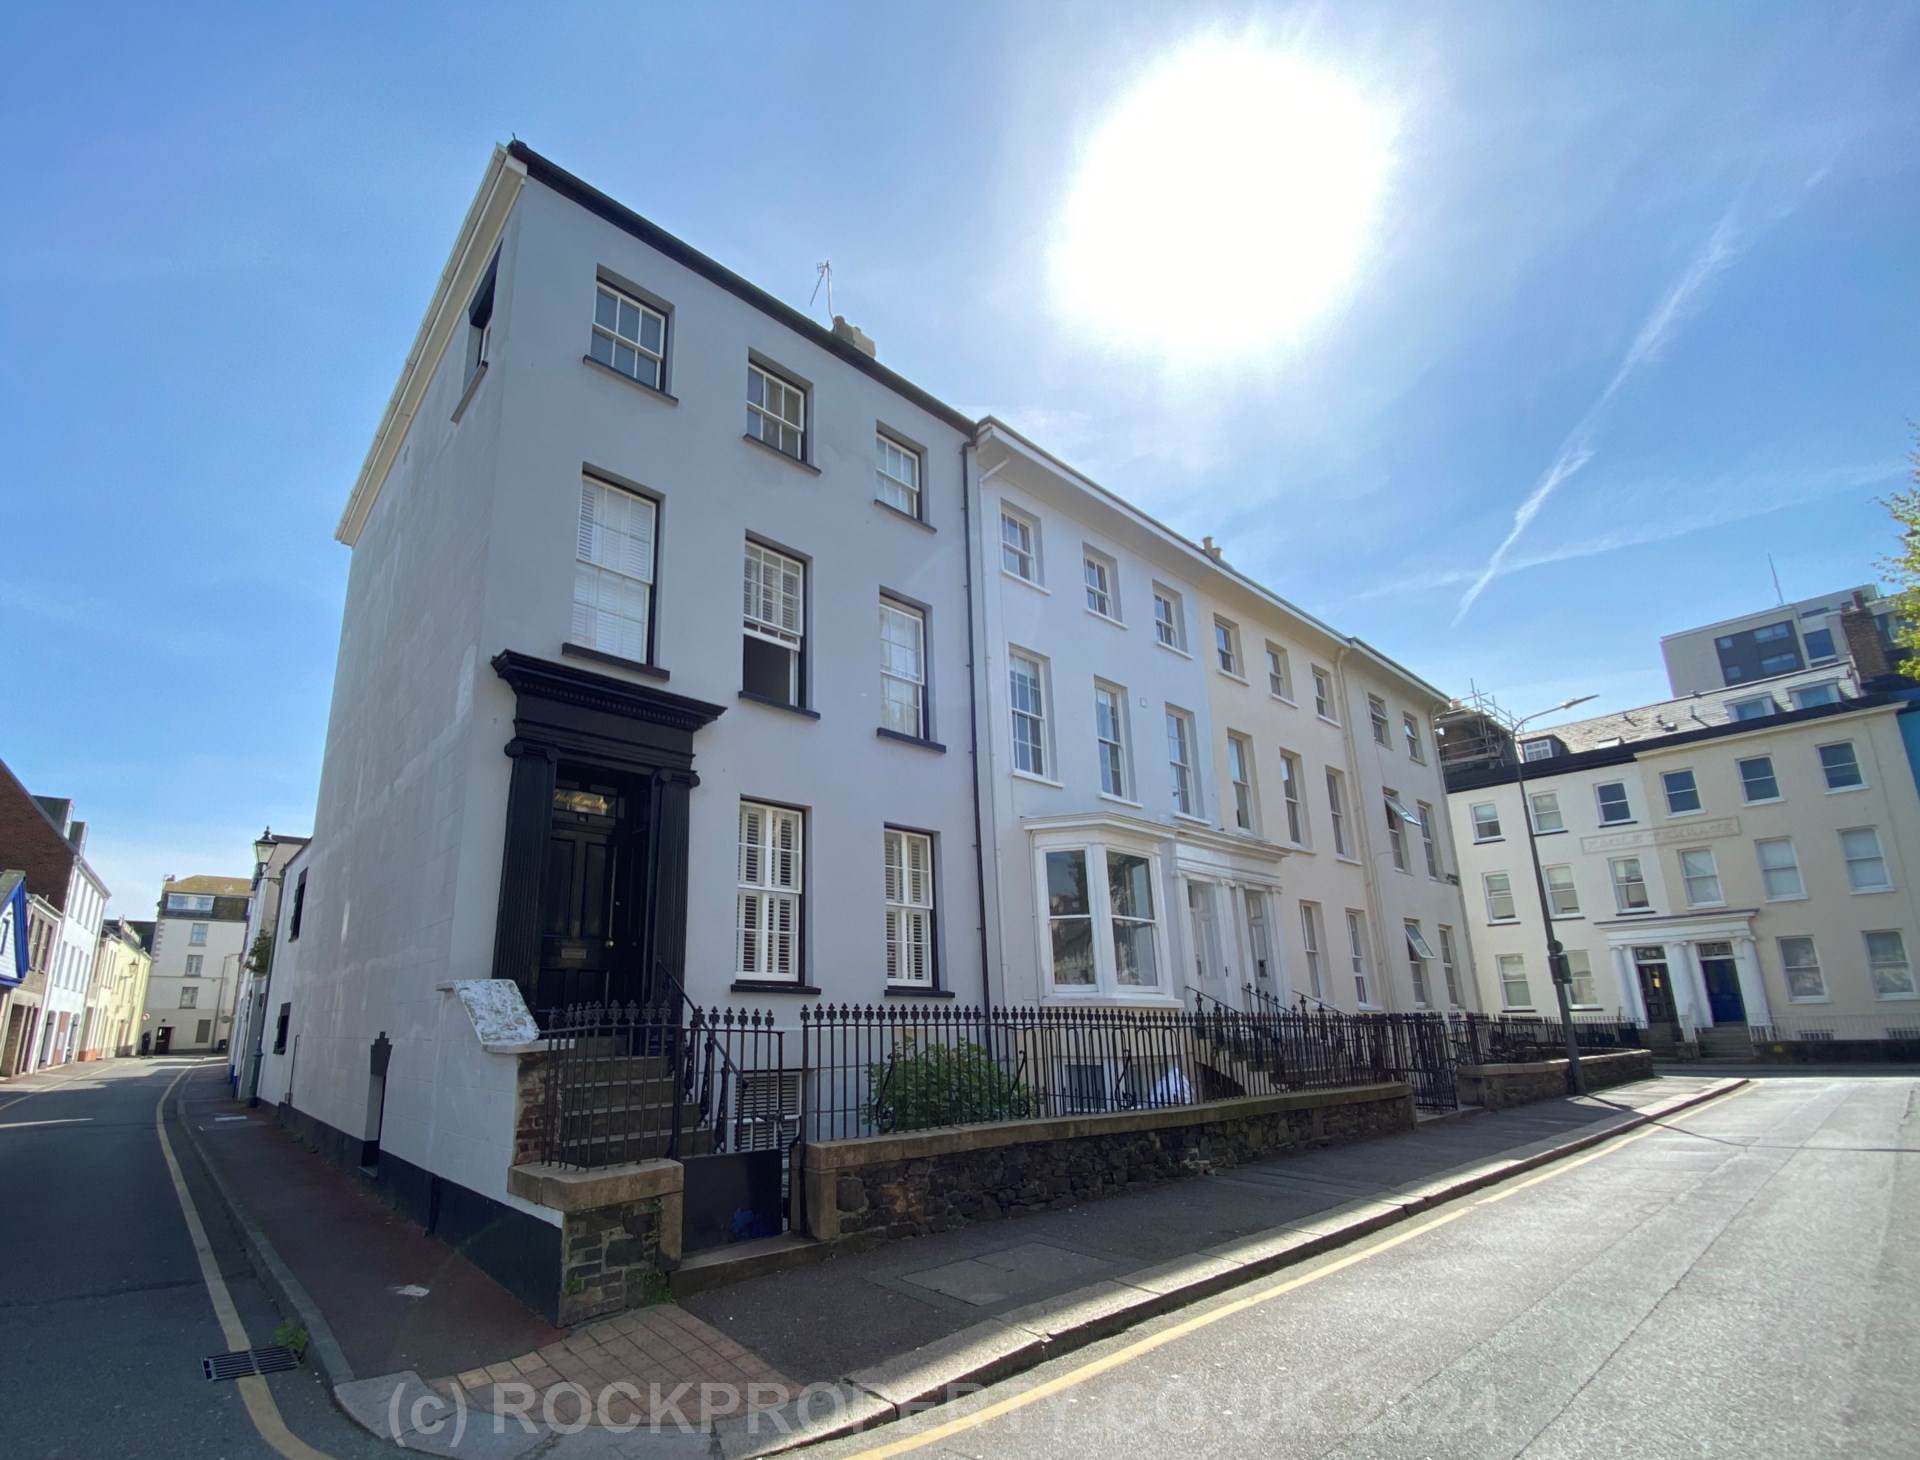 St Marks Road, St Helier, Image 1